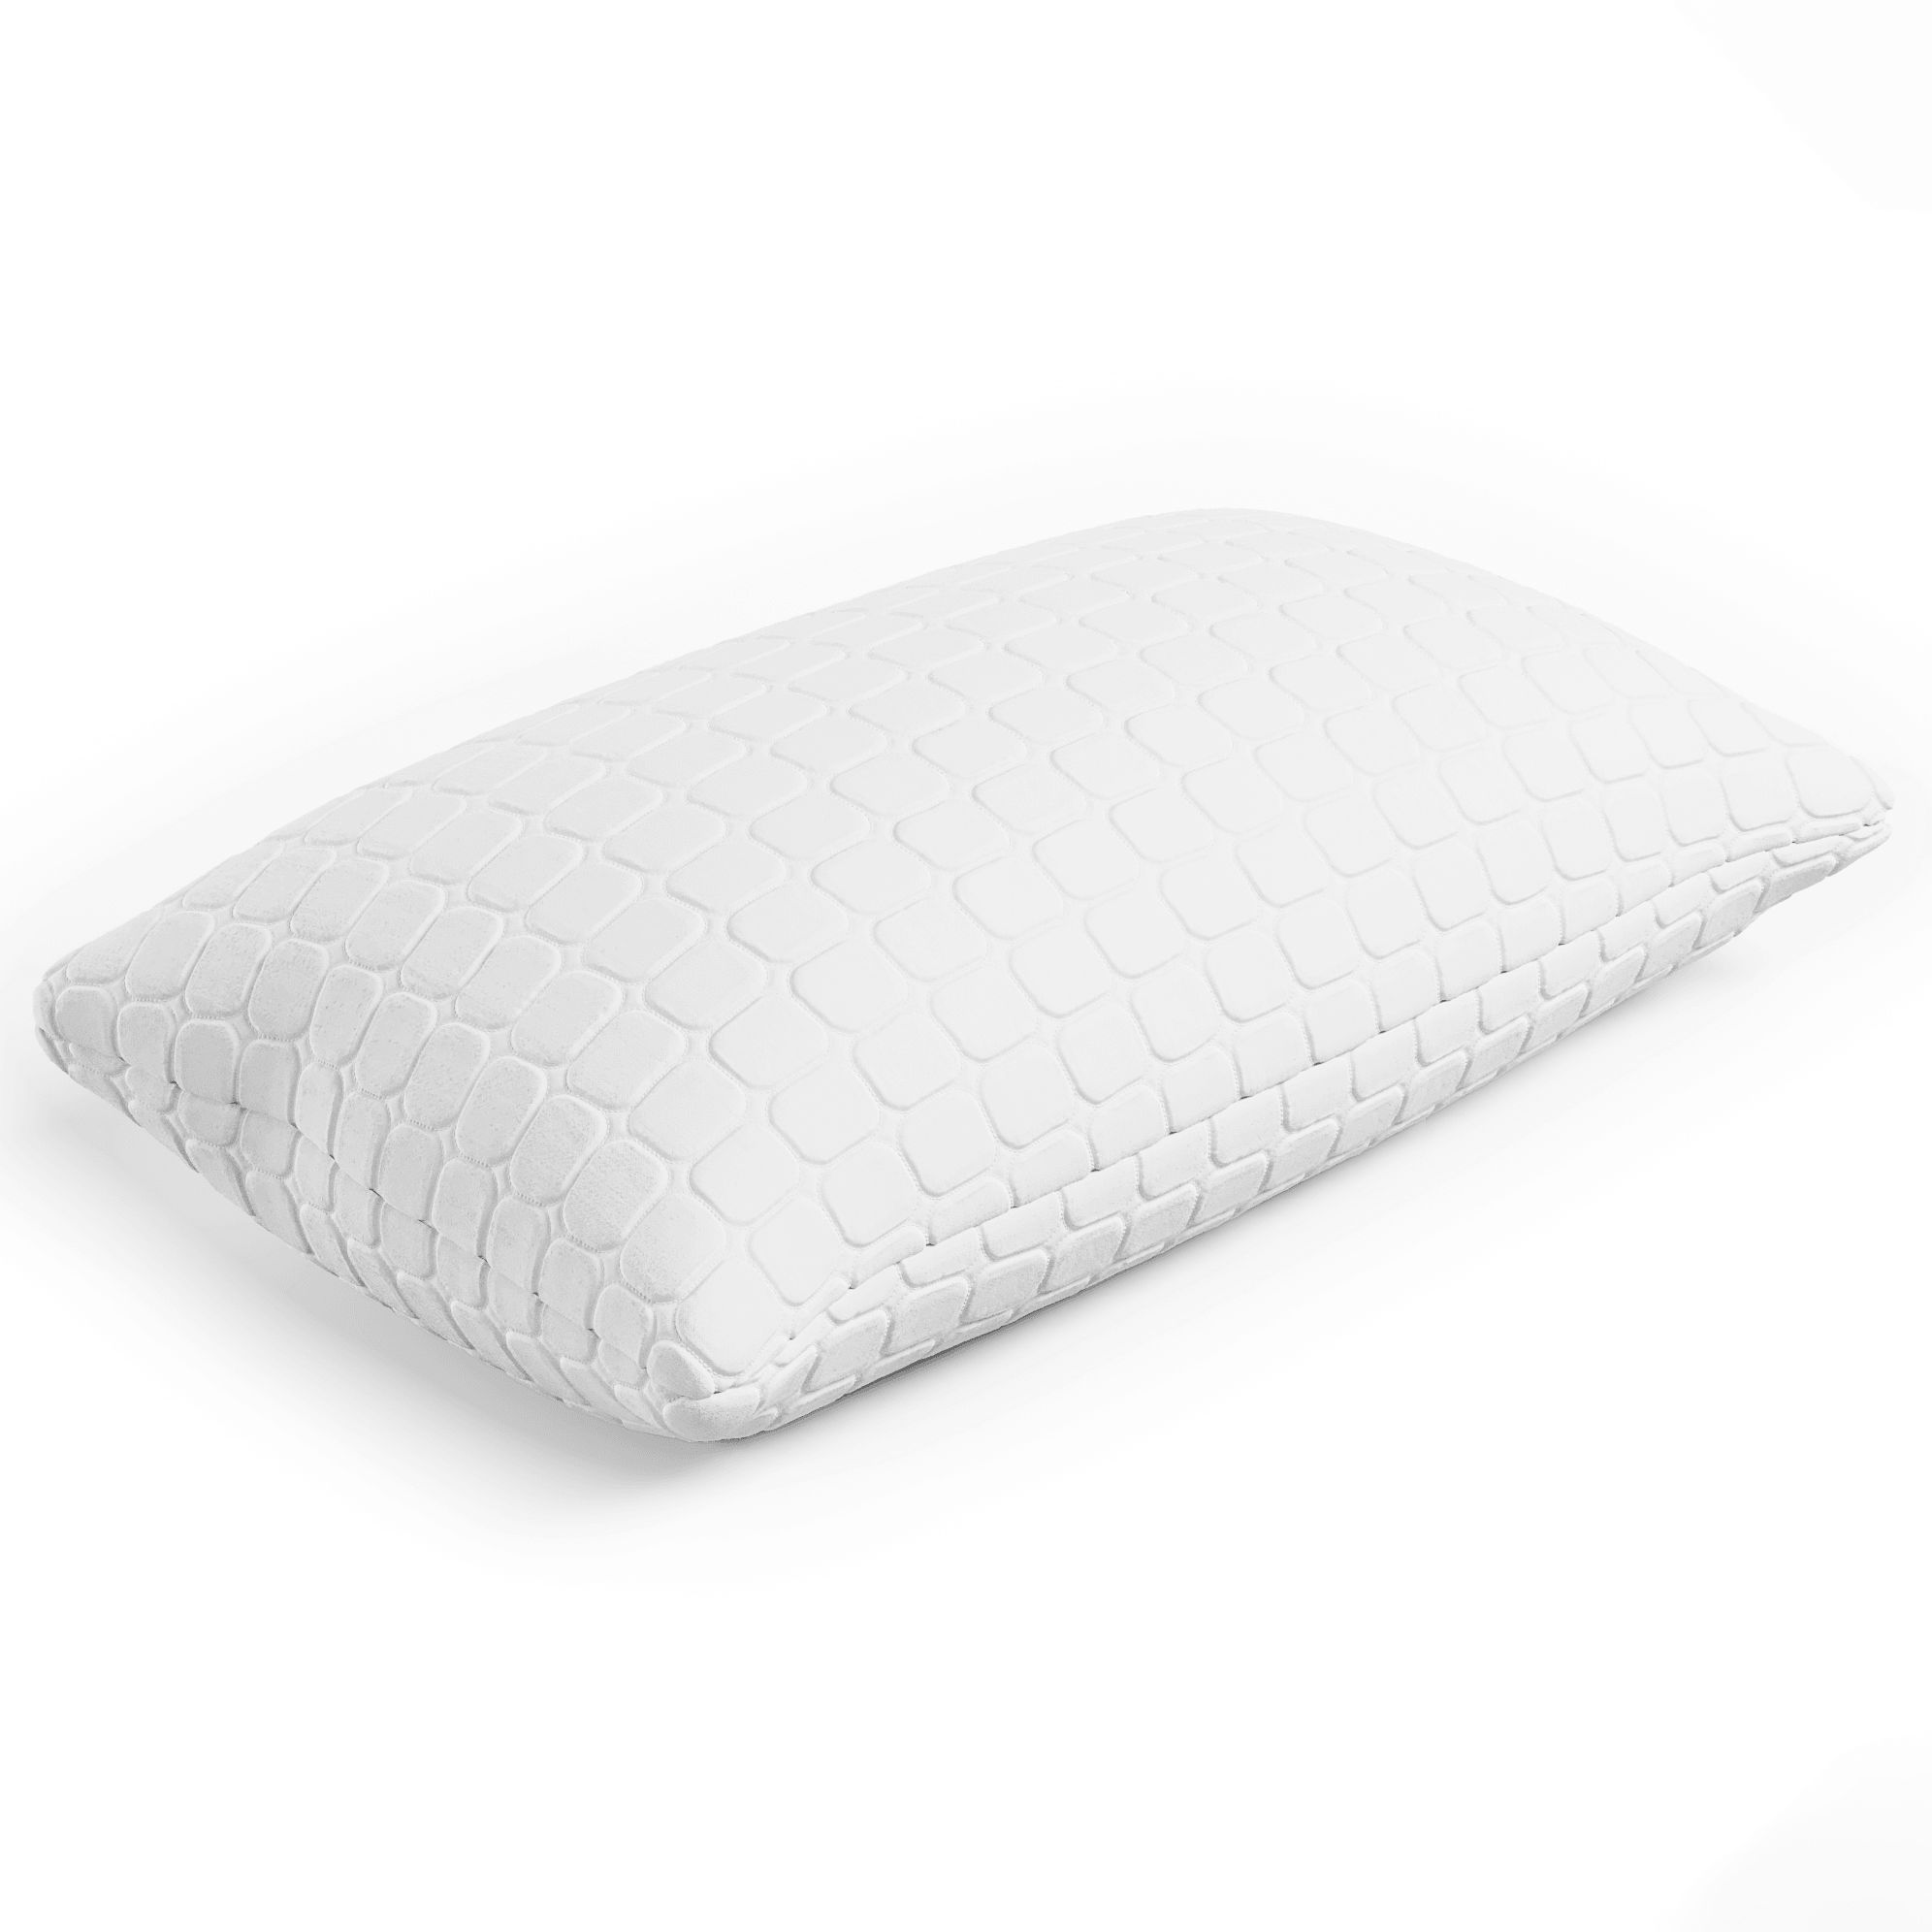 Diamond Plus Capitone Bed Pillows for Sleeping Queen Size 4 Pack